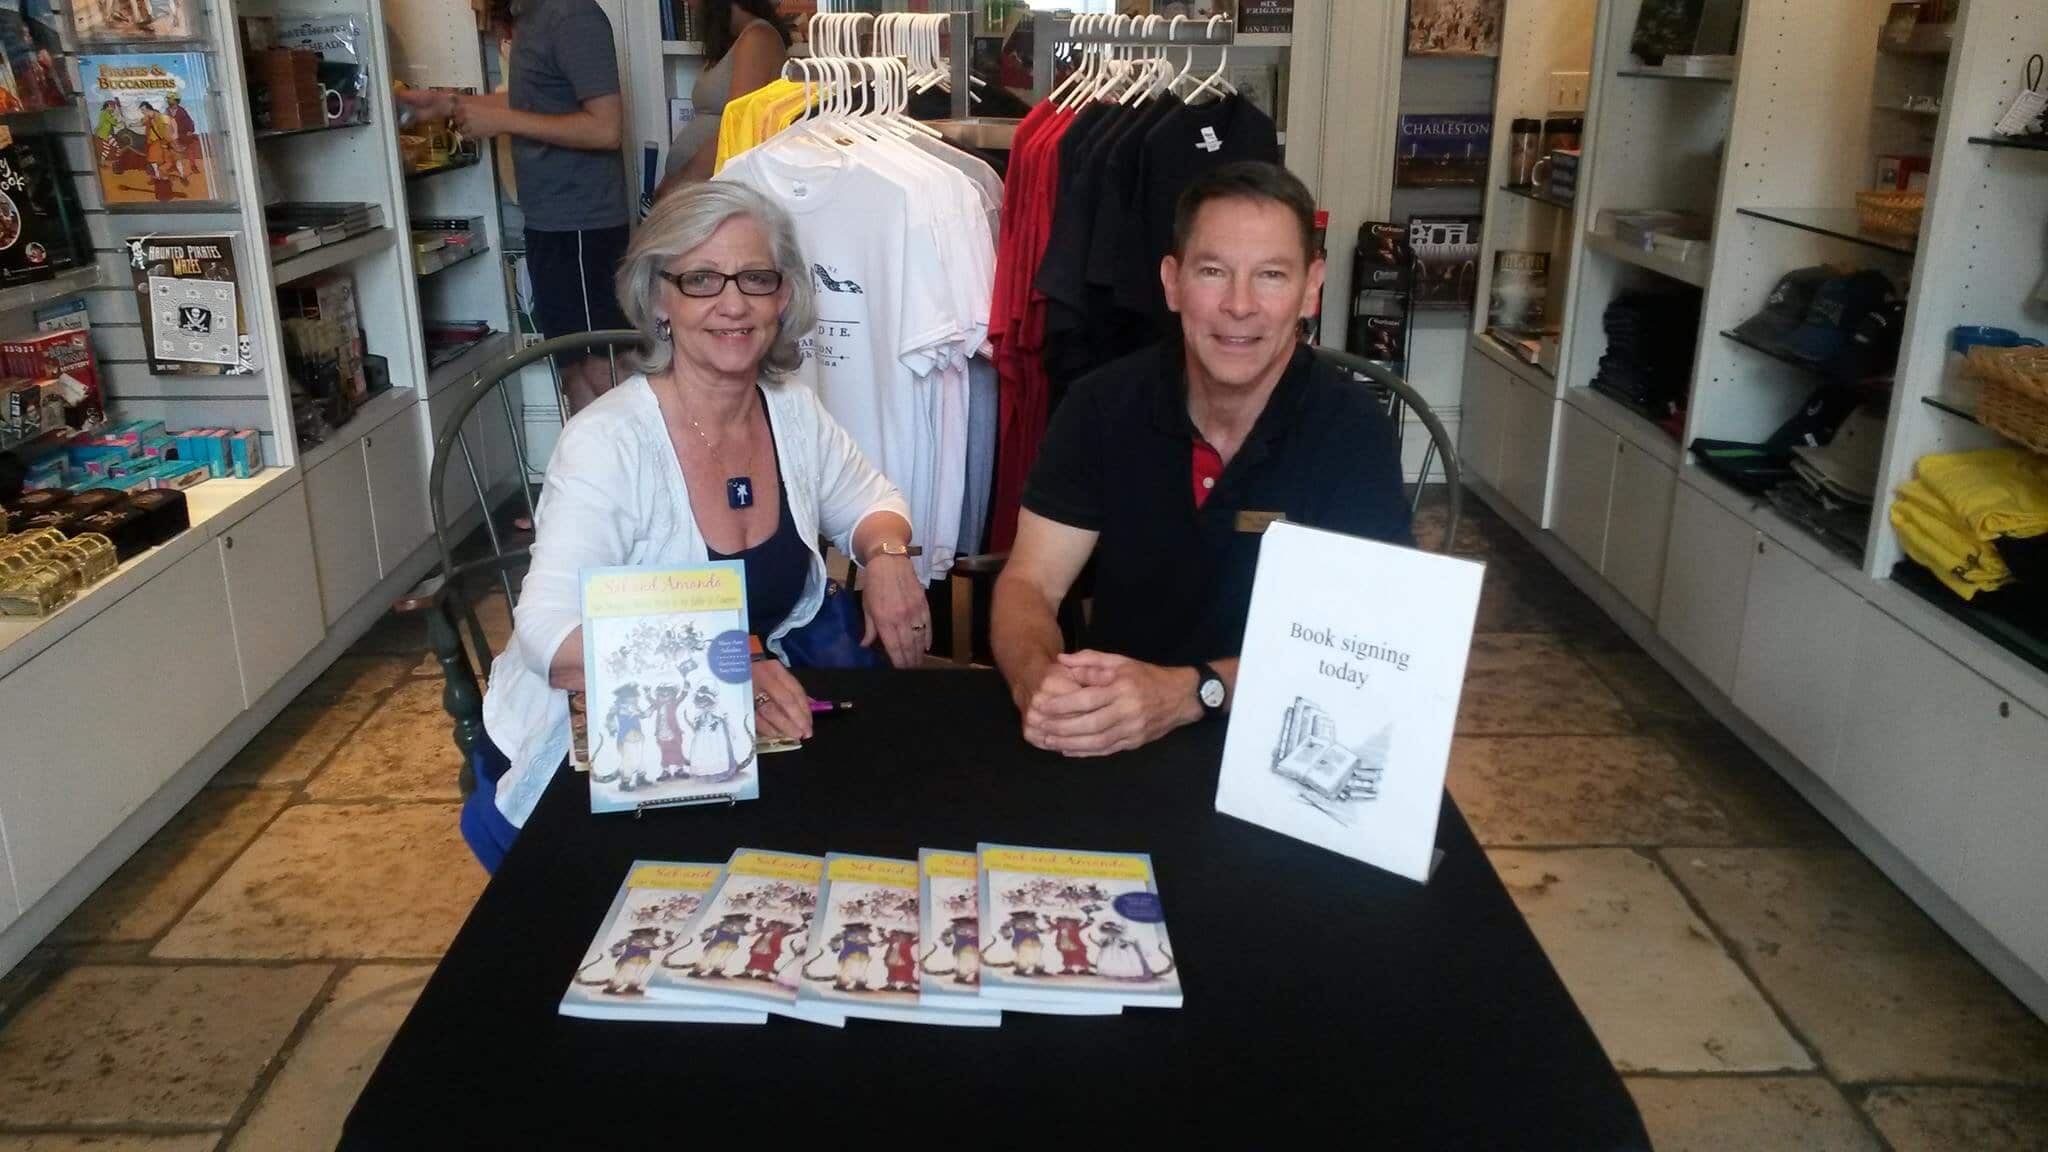 MaryAnn Solesbee, author, and Tony Waters, illustrator, at a book signing for one of the historical fiction books in Charleston, S.C.